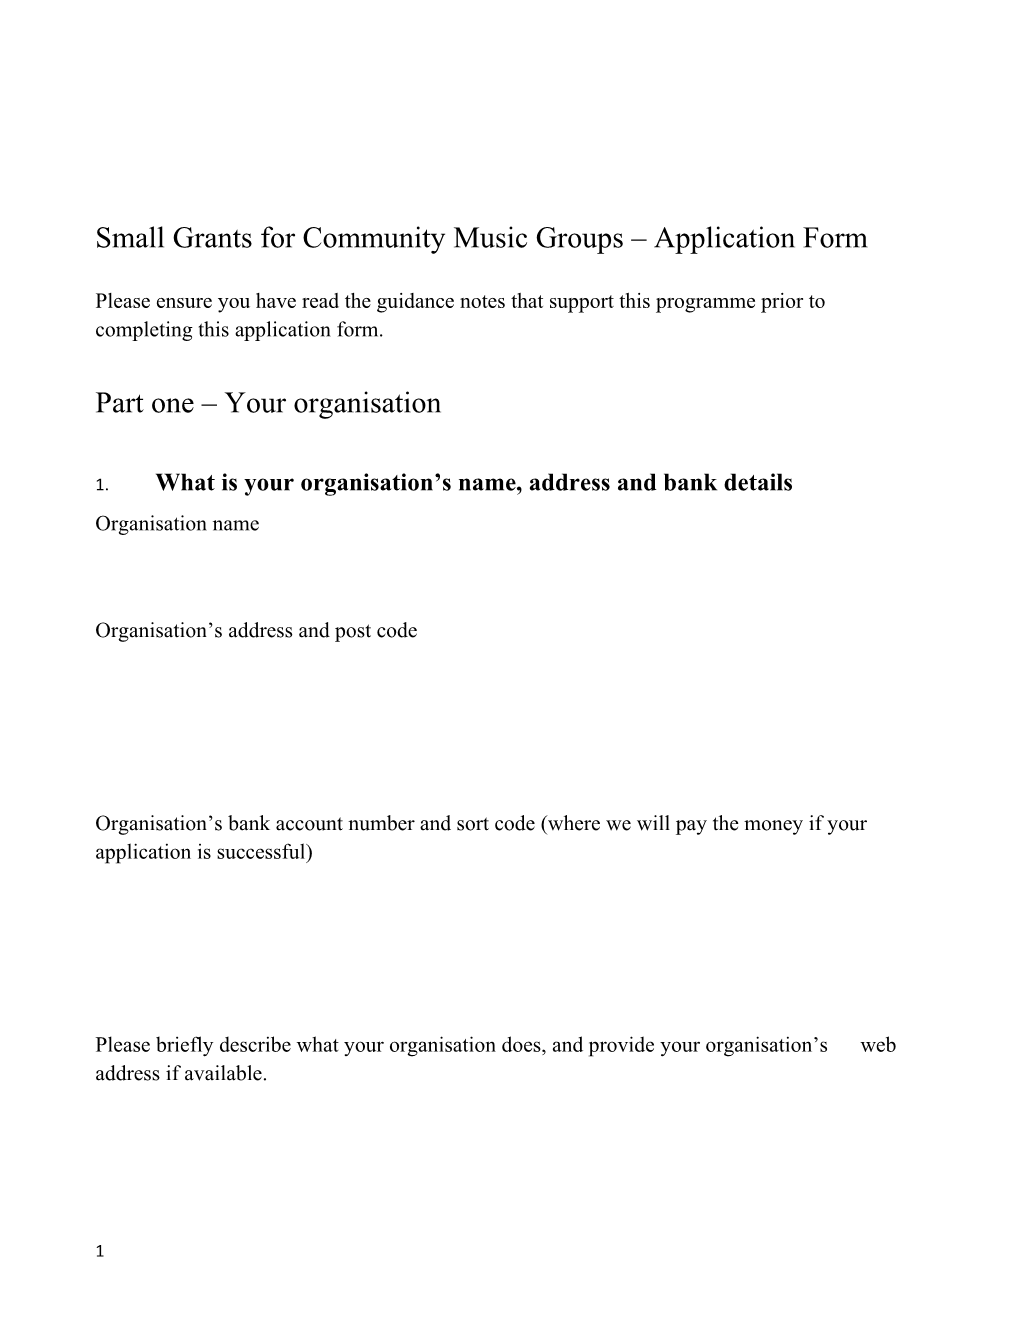 Small Grants for Community Music Groups Application Form